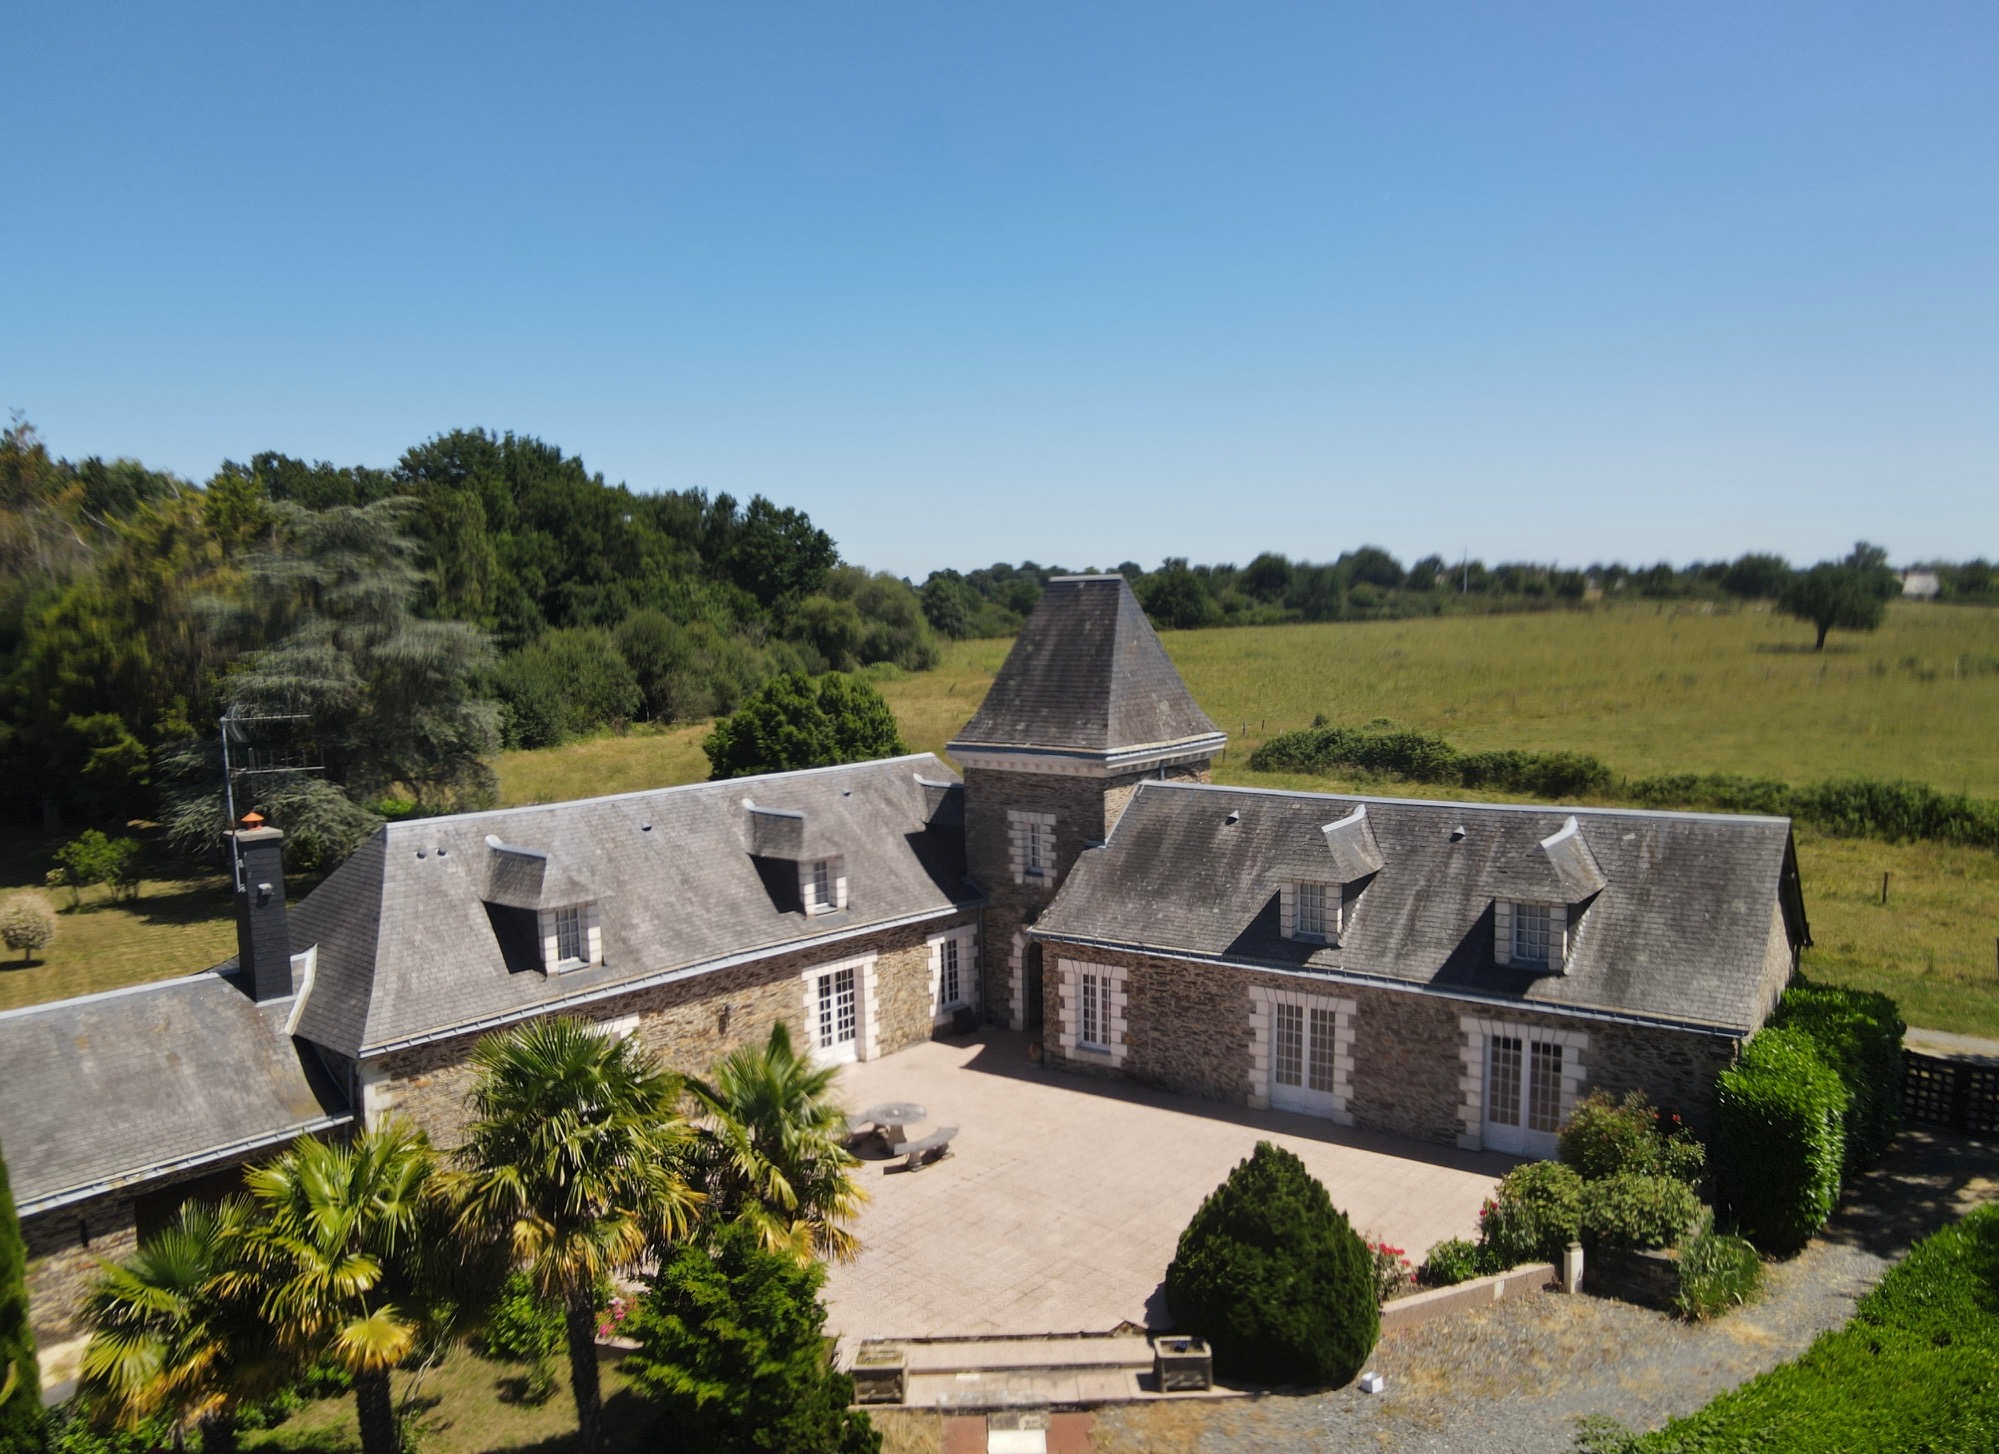 16th century property located 30 minutes from Angers-245m2- 1 hectare with pond.